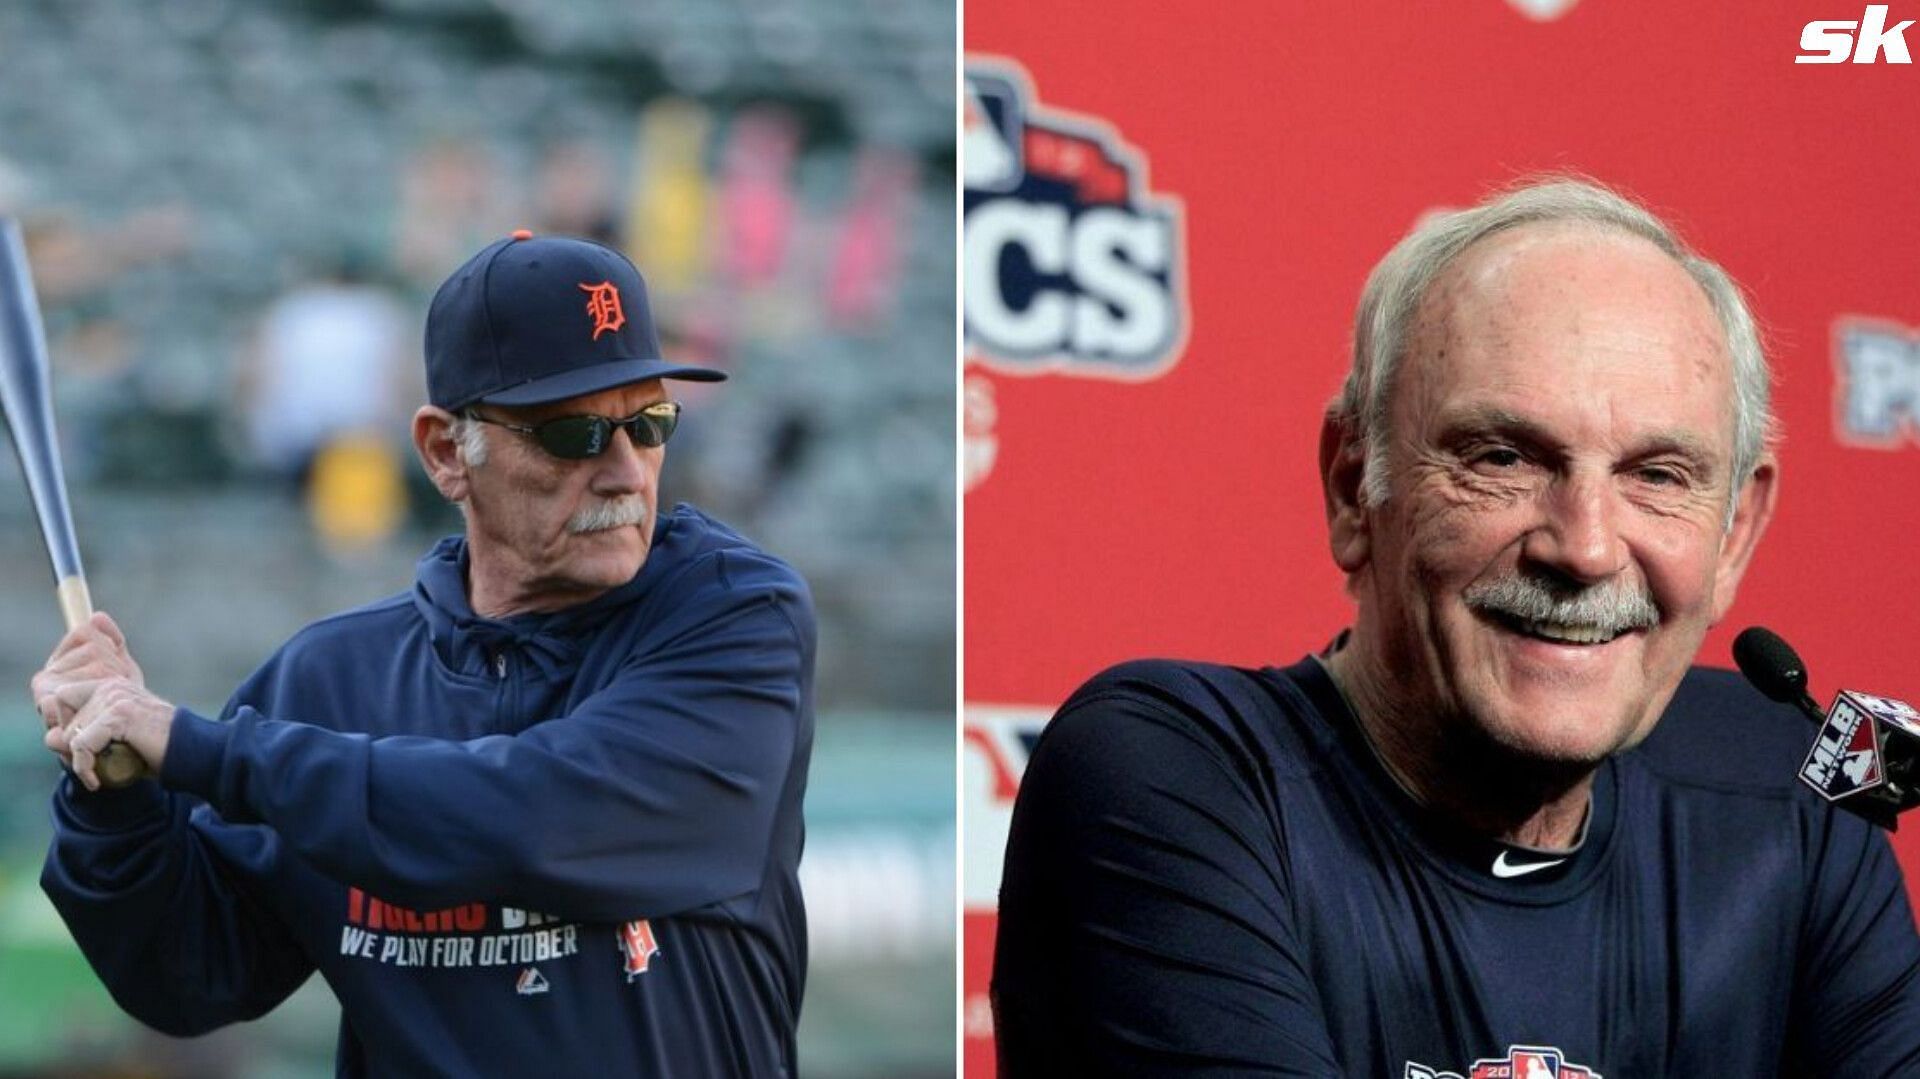 MLB legend Jim Leyland inducted into the Baseball Hall of Fame (credits: gettyimages.com)